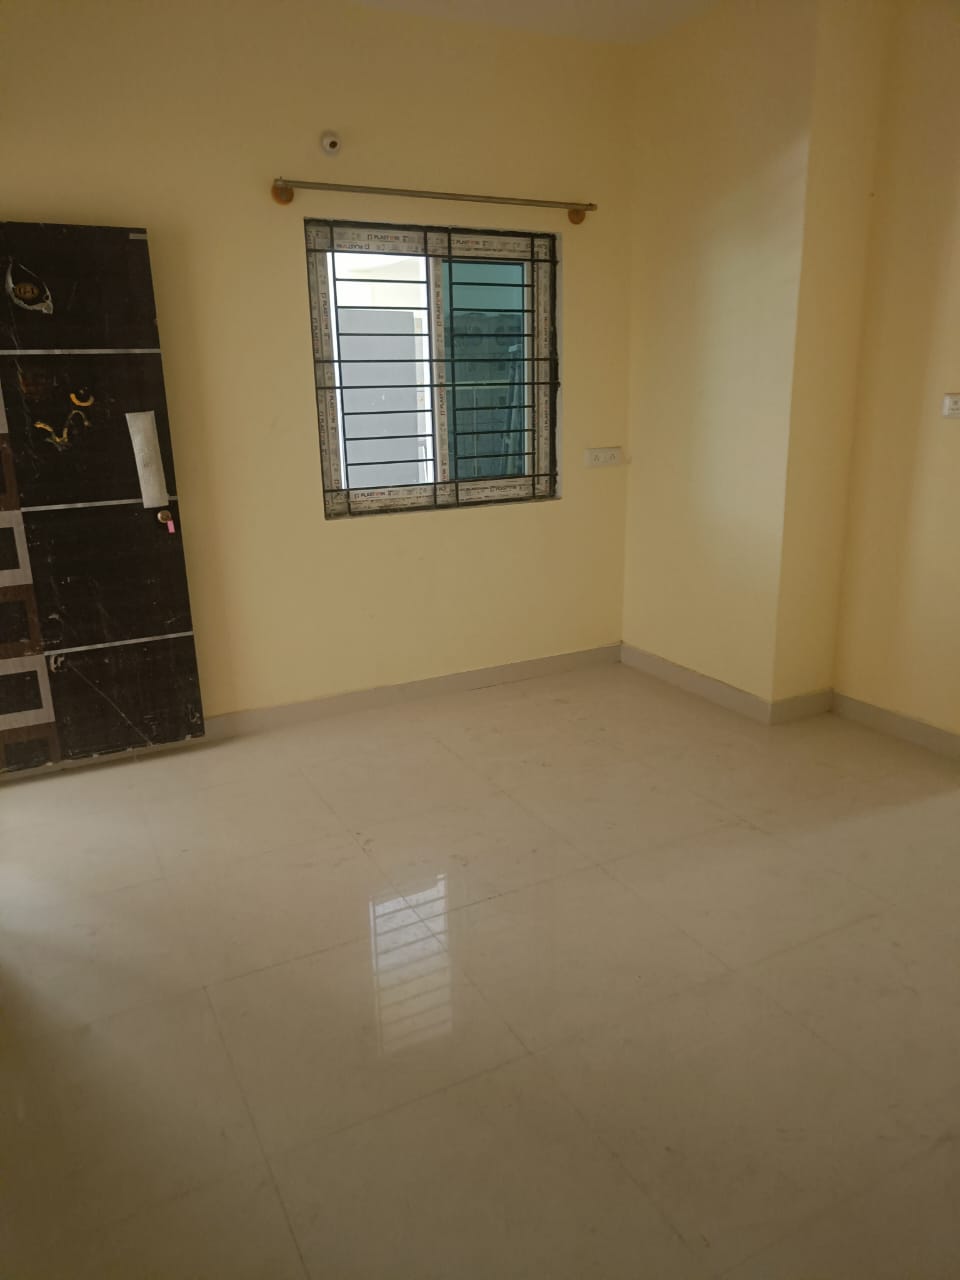 3 BHK Residential Apartment for Lease Only at JAML2 - 4863-29lakh in JP Nagar 4th Phase